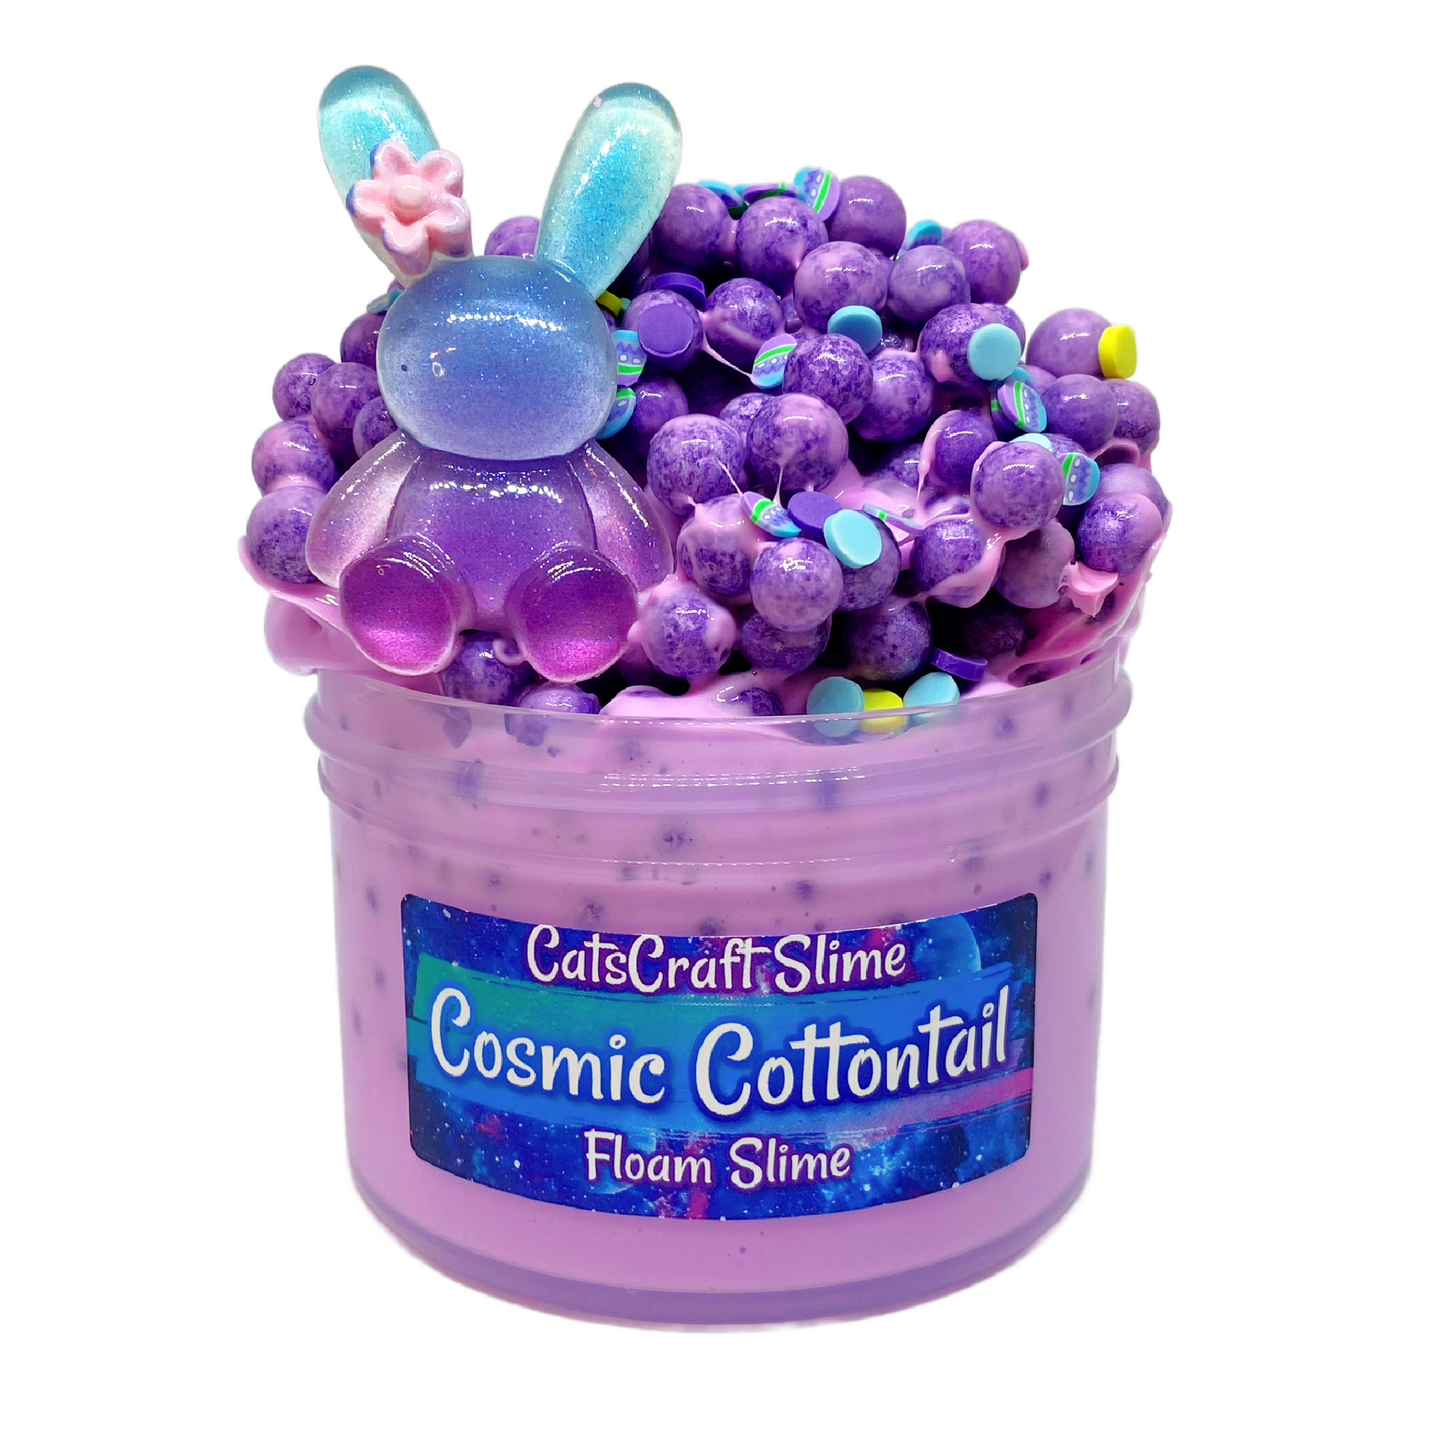 Jumbo Floam Slime "Cosmic Cottontail" SCENTED crunchy ASMR foam beads with Easter Bunny charm